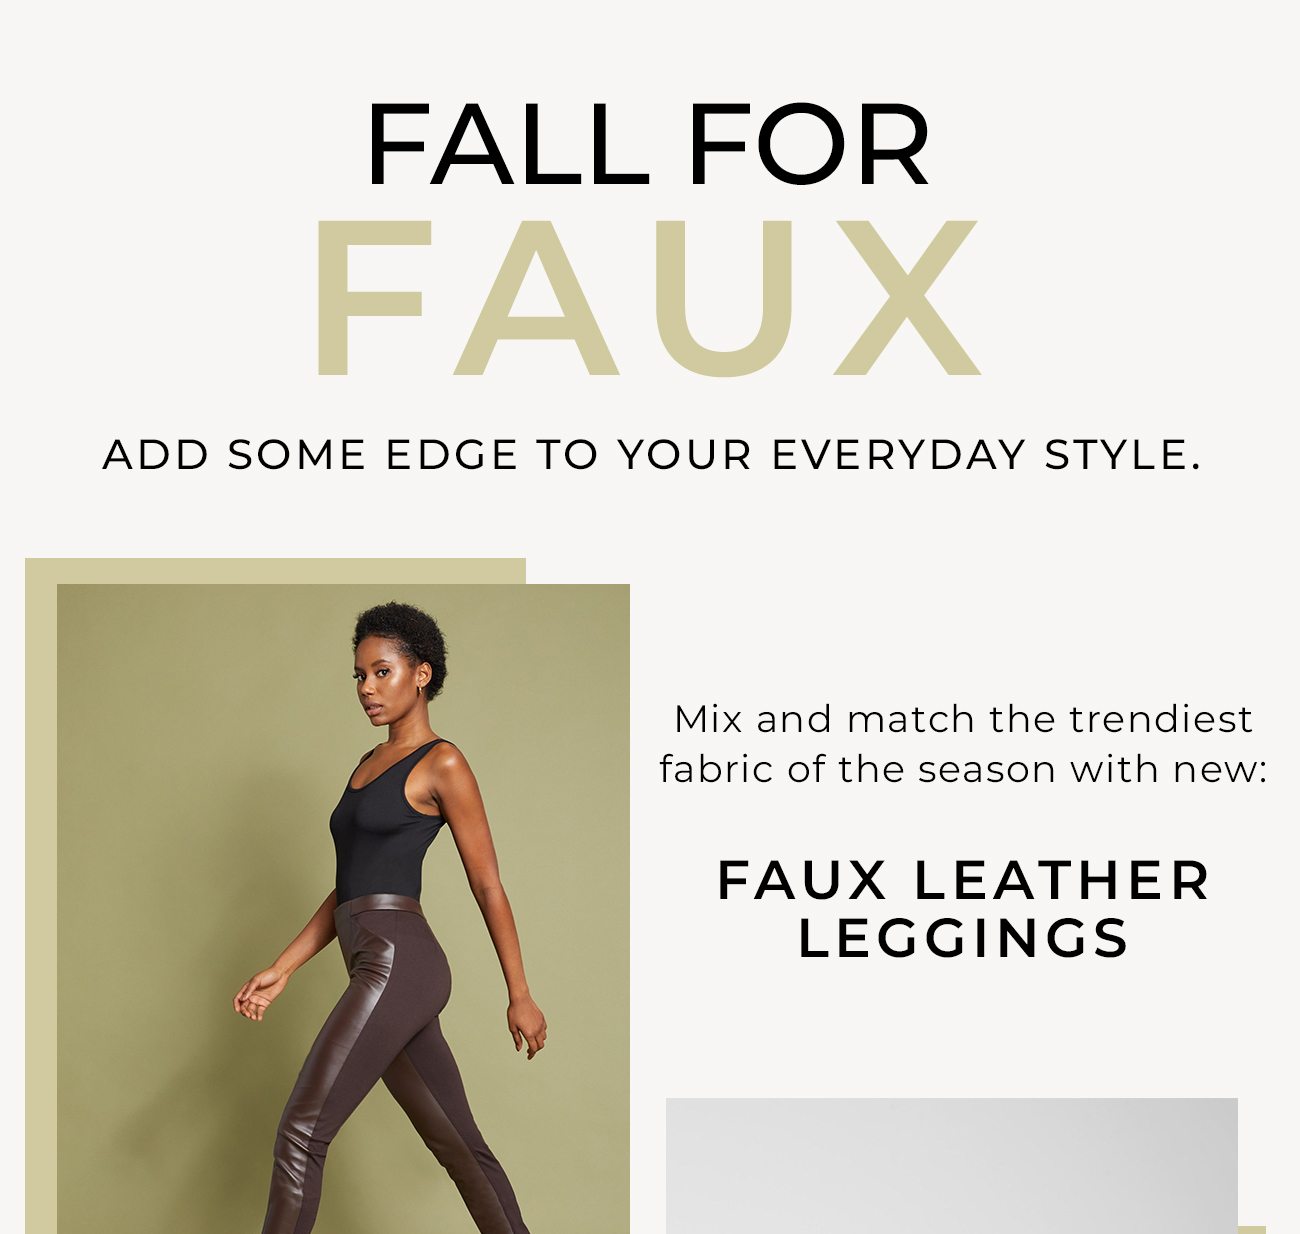  Fall For Faux - Add some edge to your everyday style. Mix and match the trendiest fabric of the season with new faux leather leggings, bodysuits, and jeans.